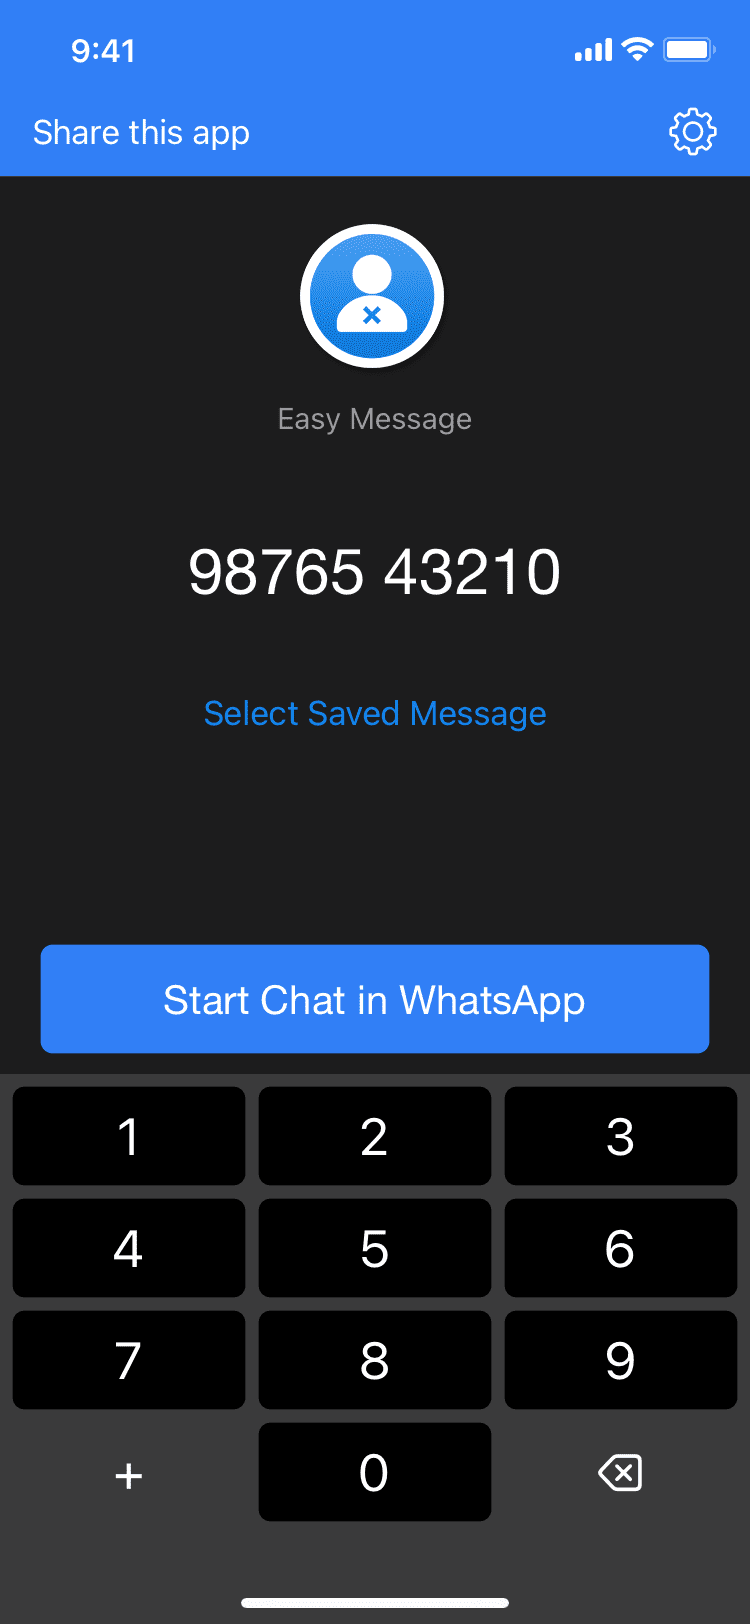 Easy Message to WhatsApp message non-saved contacts on iPhone